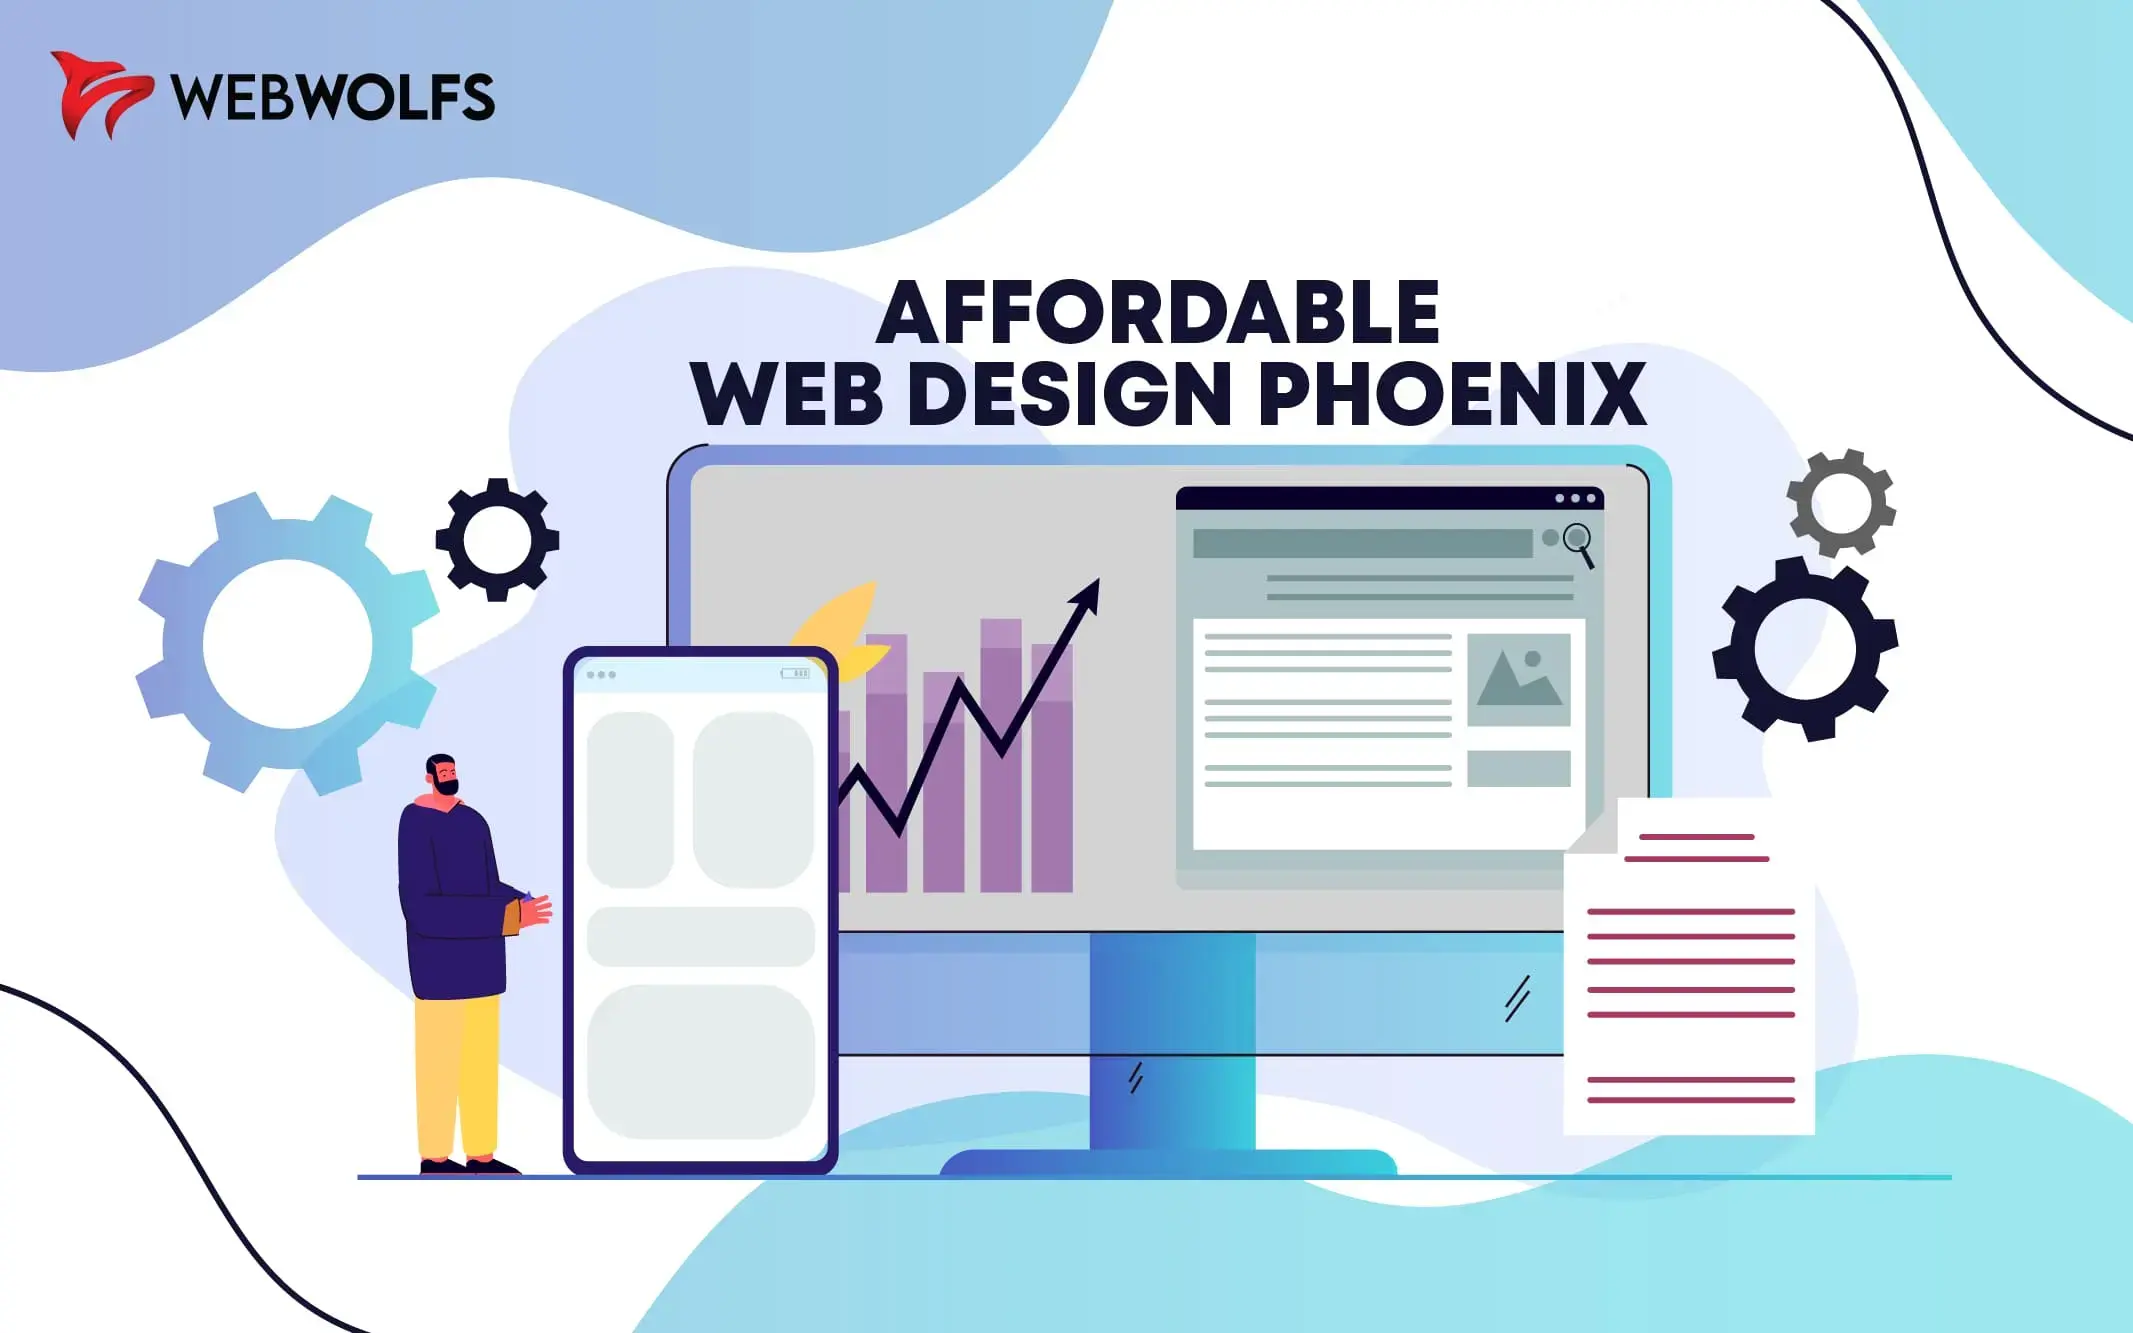 Affordable Web Design In Phoenix To Benefit SMEs In the U.S